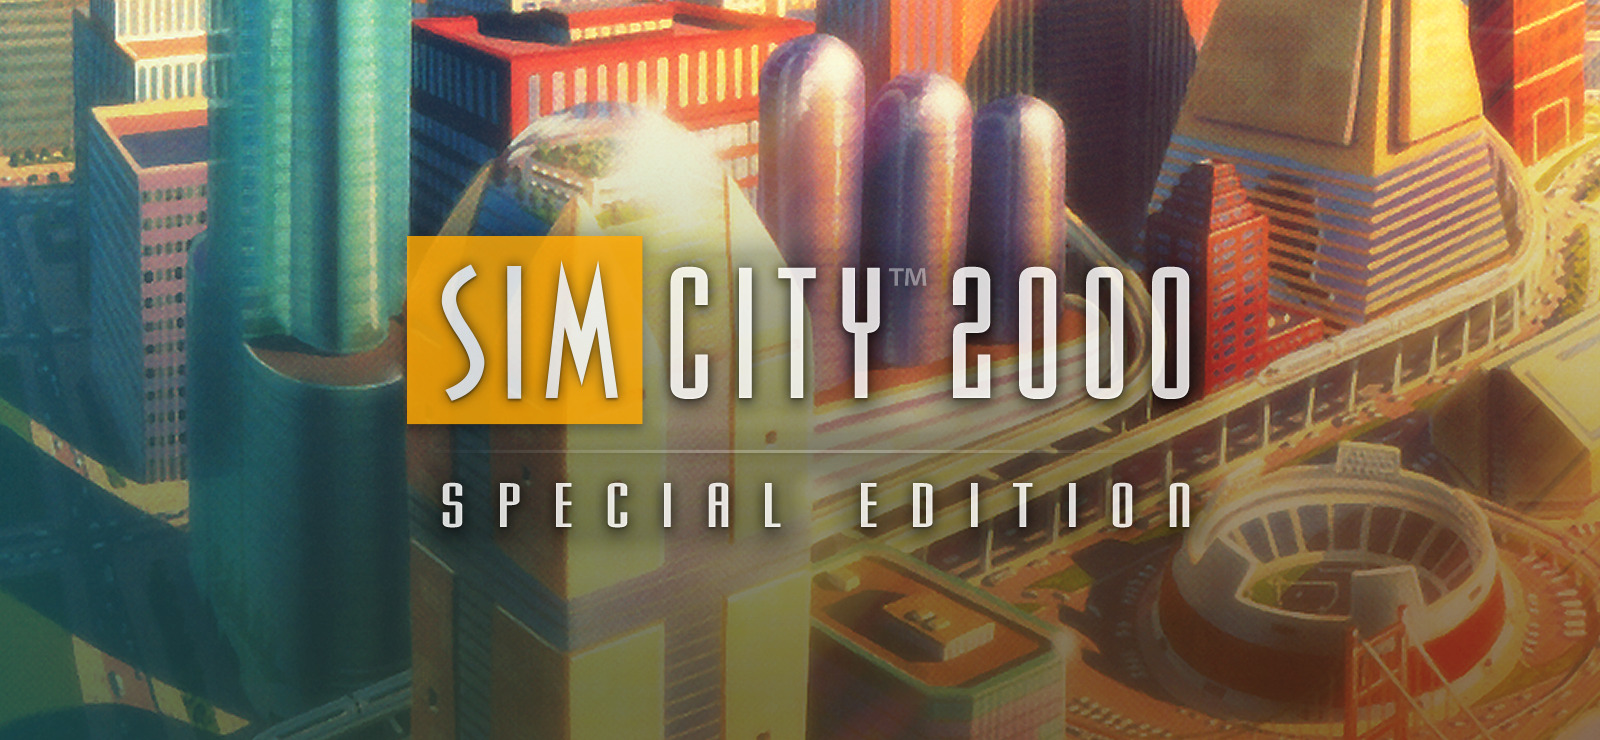 simcity 2000 download for 64 bit systems